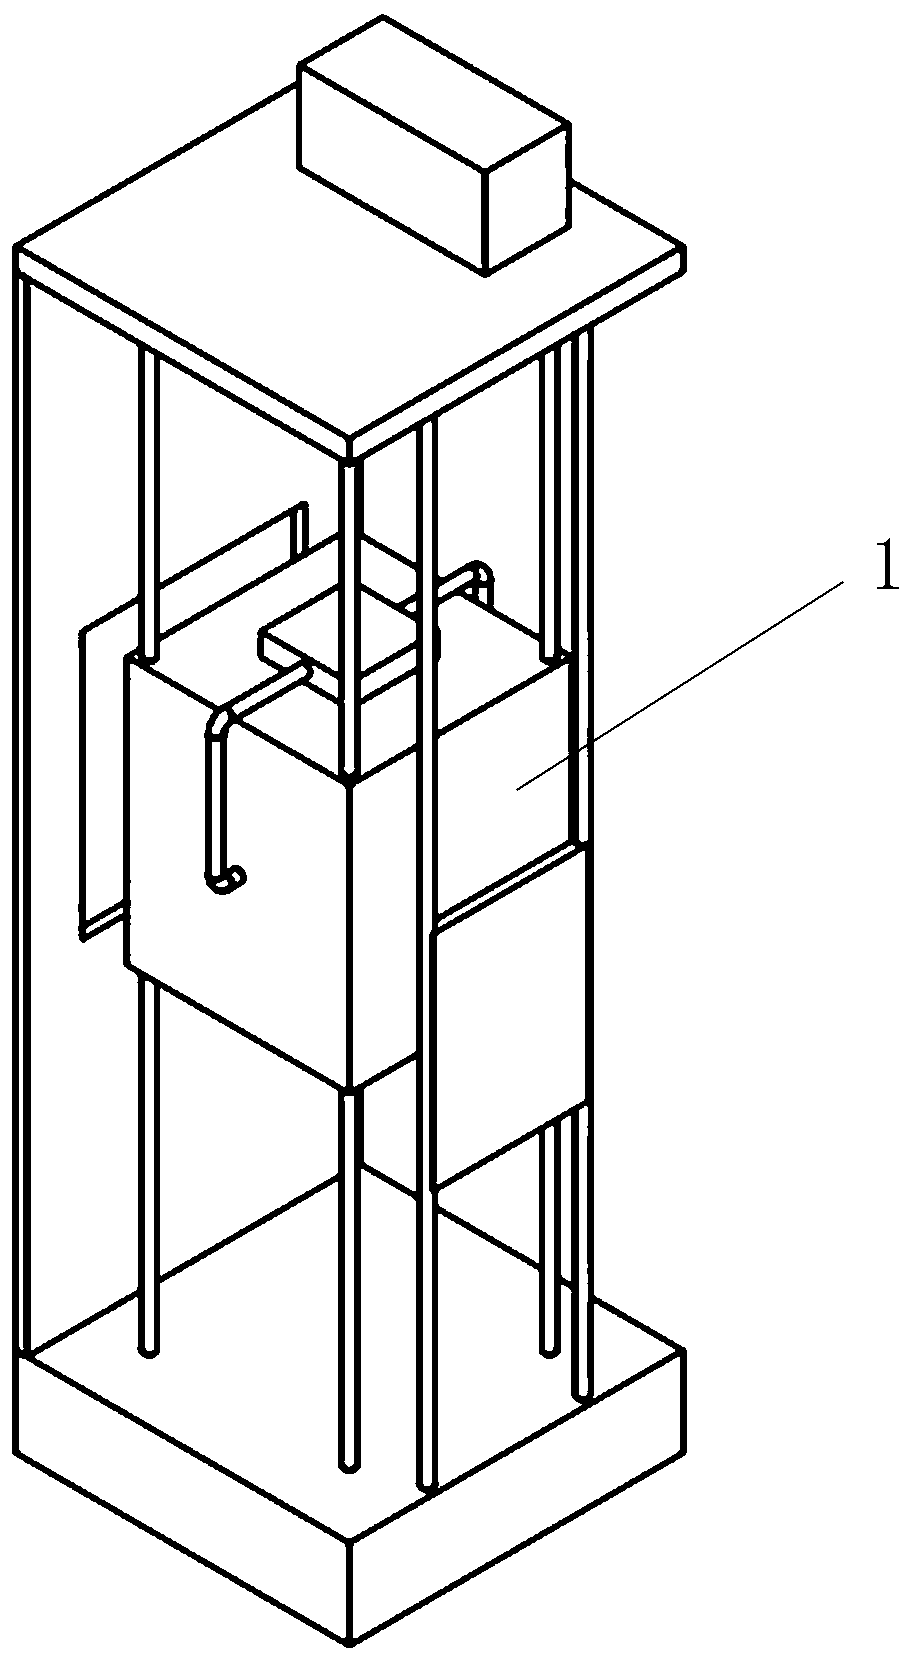 A traction elevator with controllable airflow